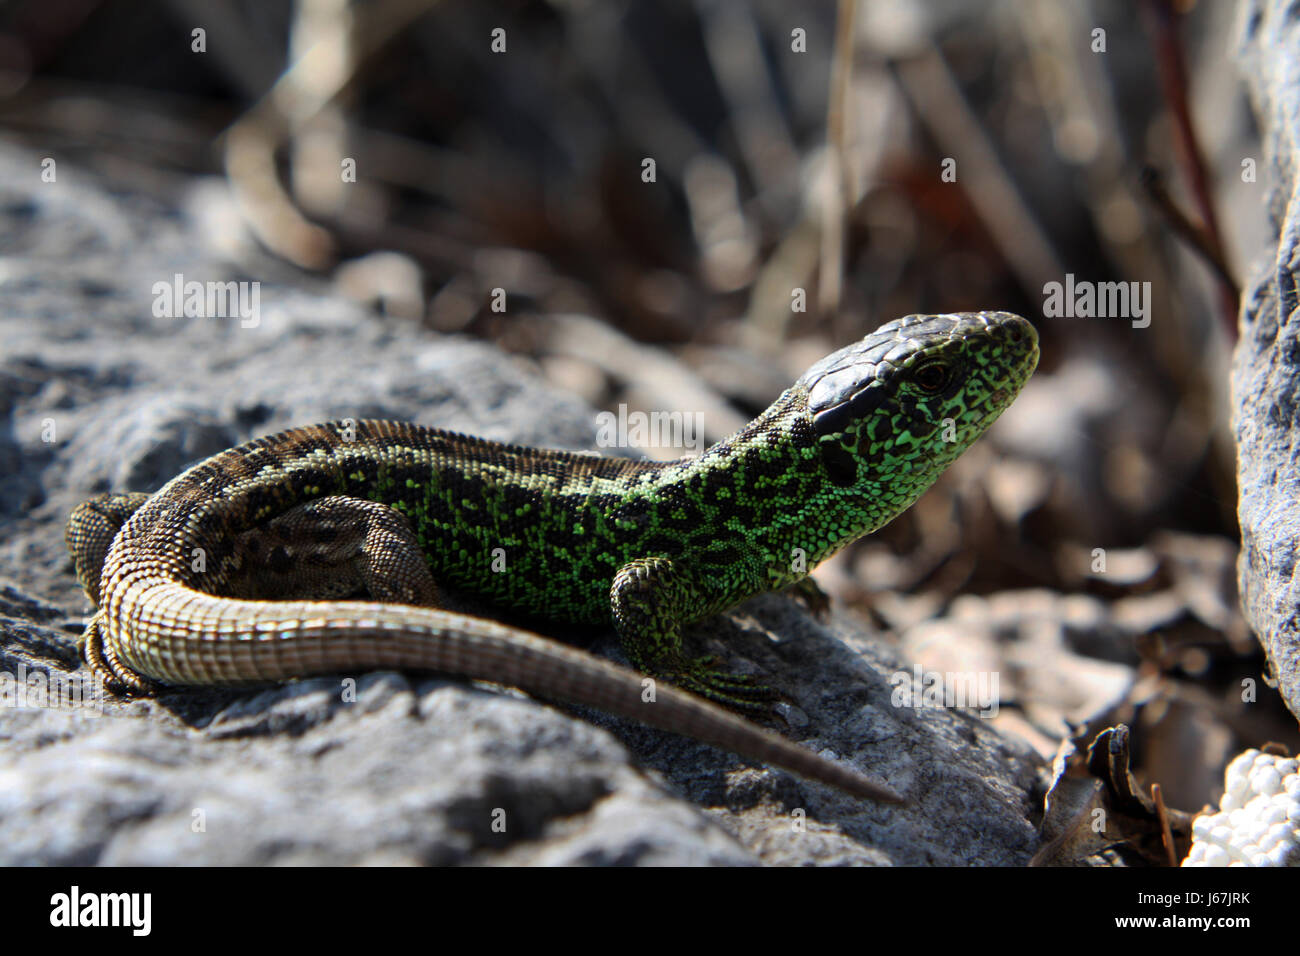 reptiles critters stonewall acclivities zauneidechse zauneidechse bodeneidechse Stock Photo